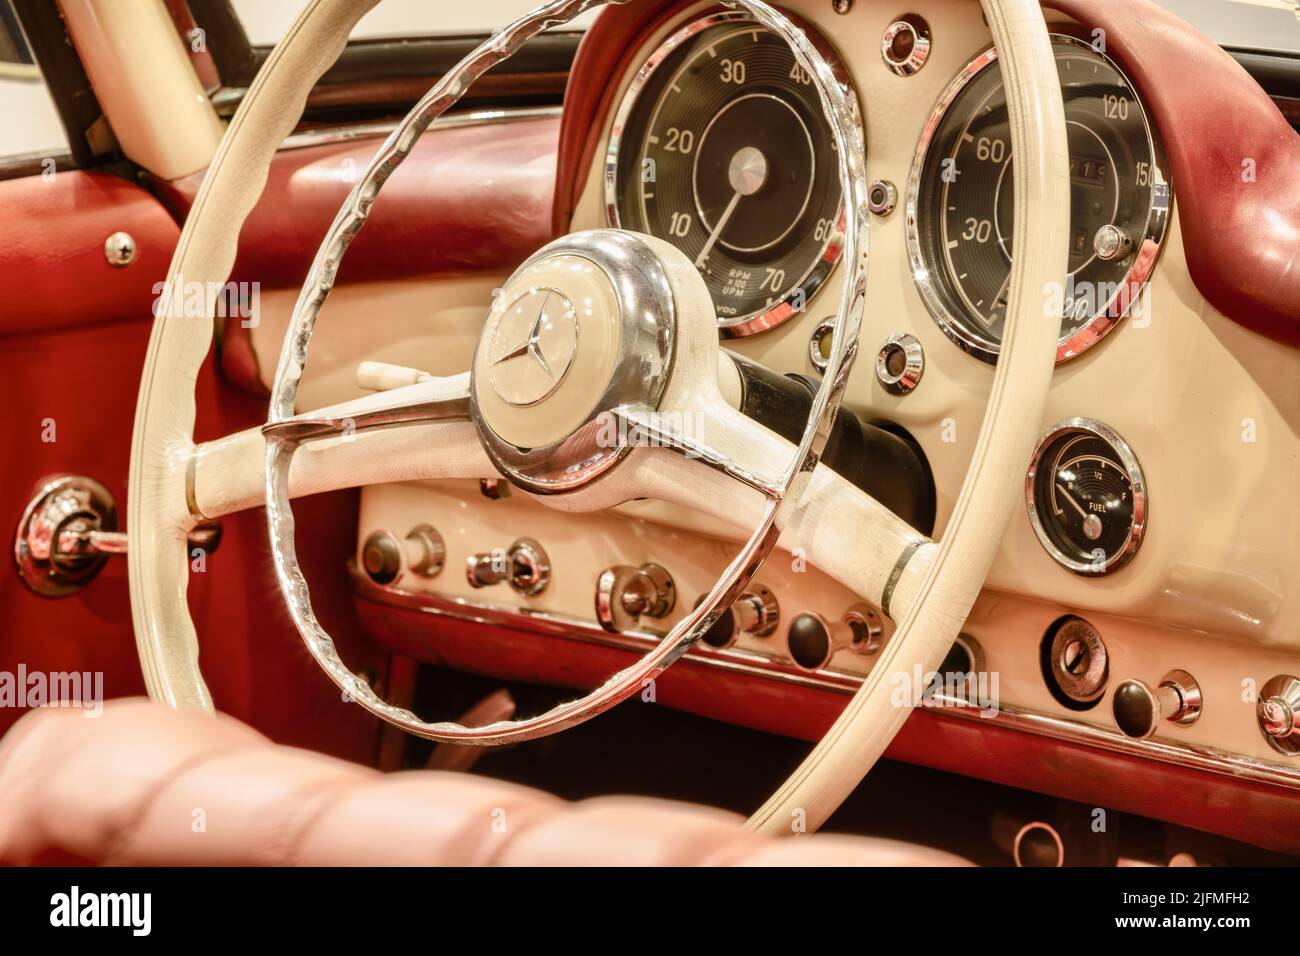 Essen, Germany - March 23, 2022: Interior of a classic red Mercedes 300 SL convertible car in Essen, Germany Stock Photo